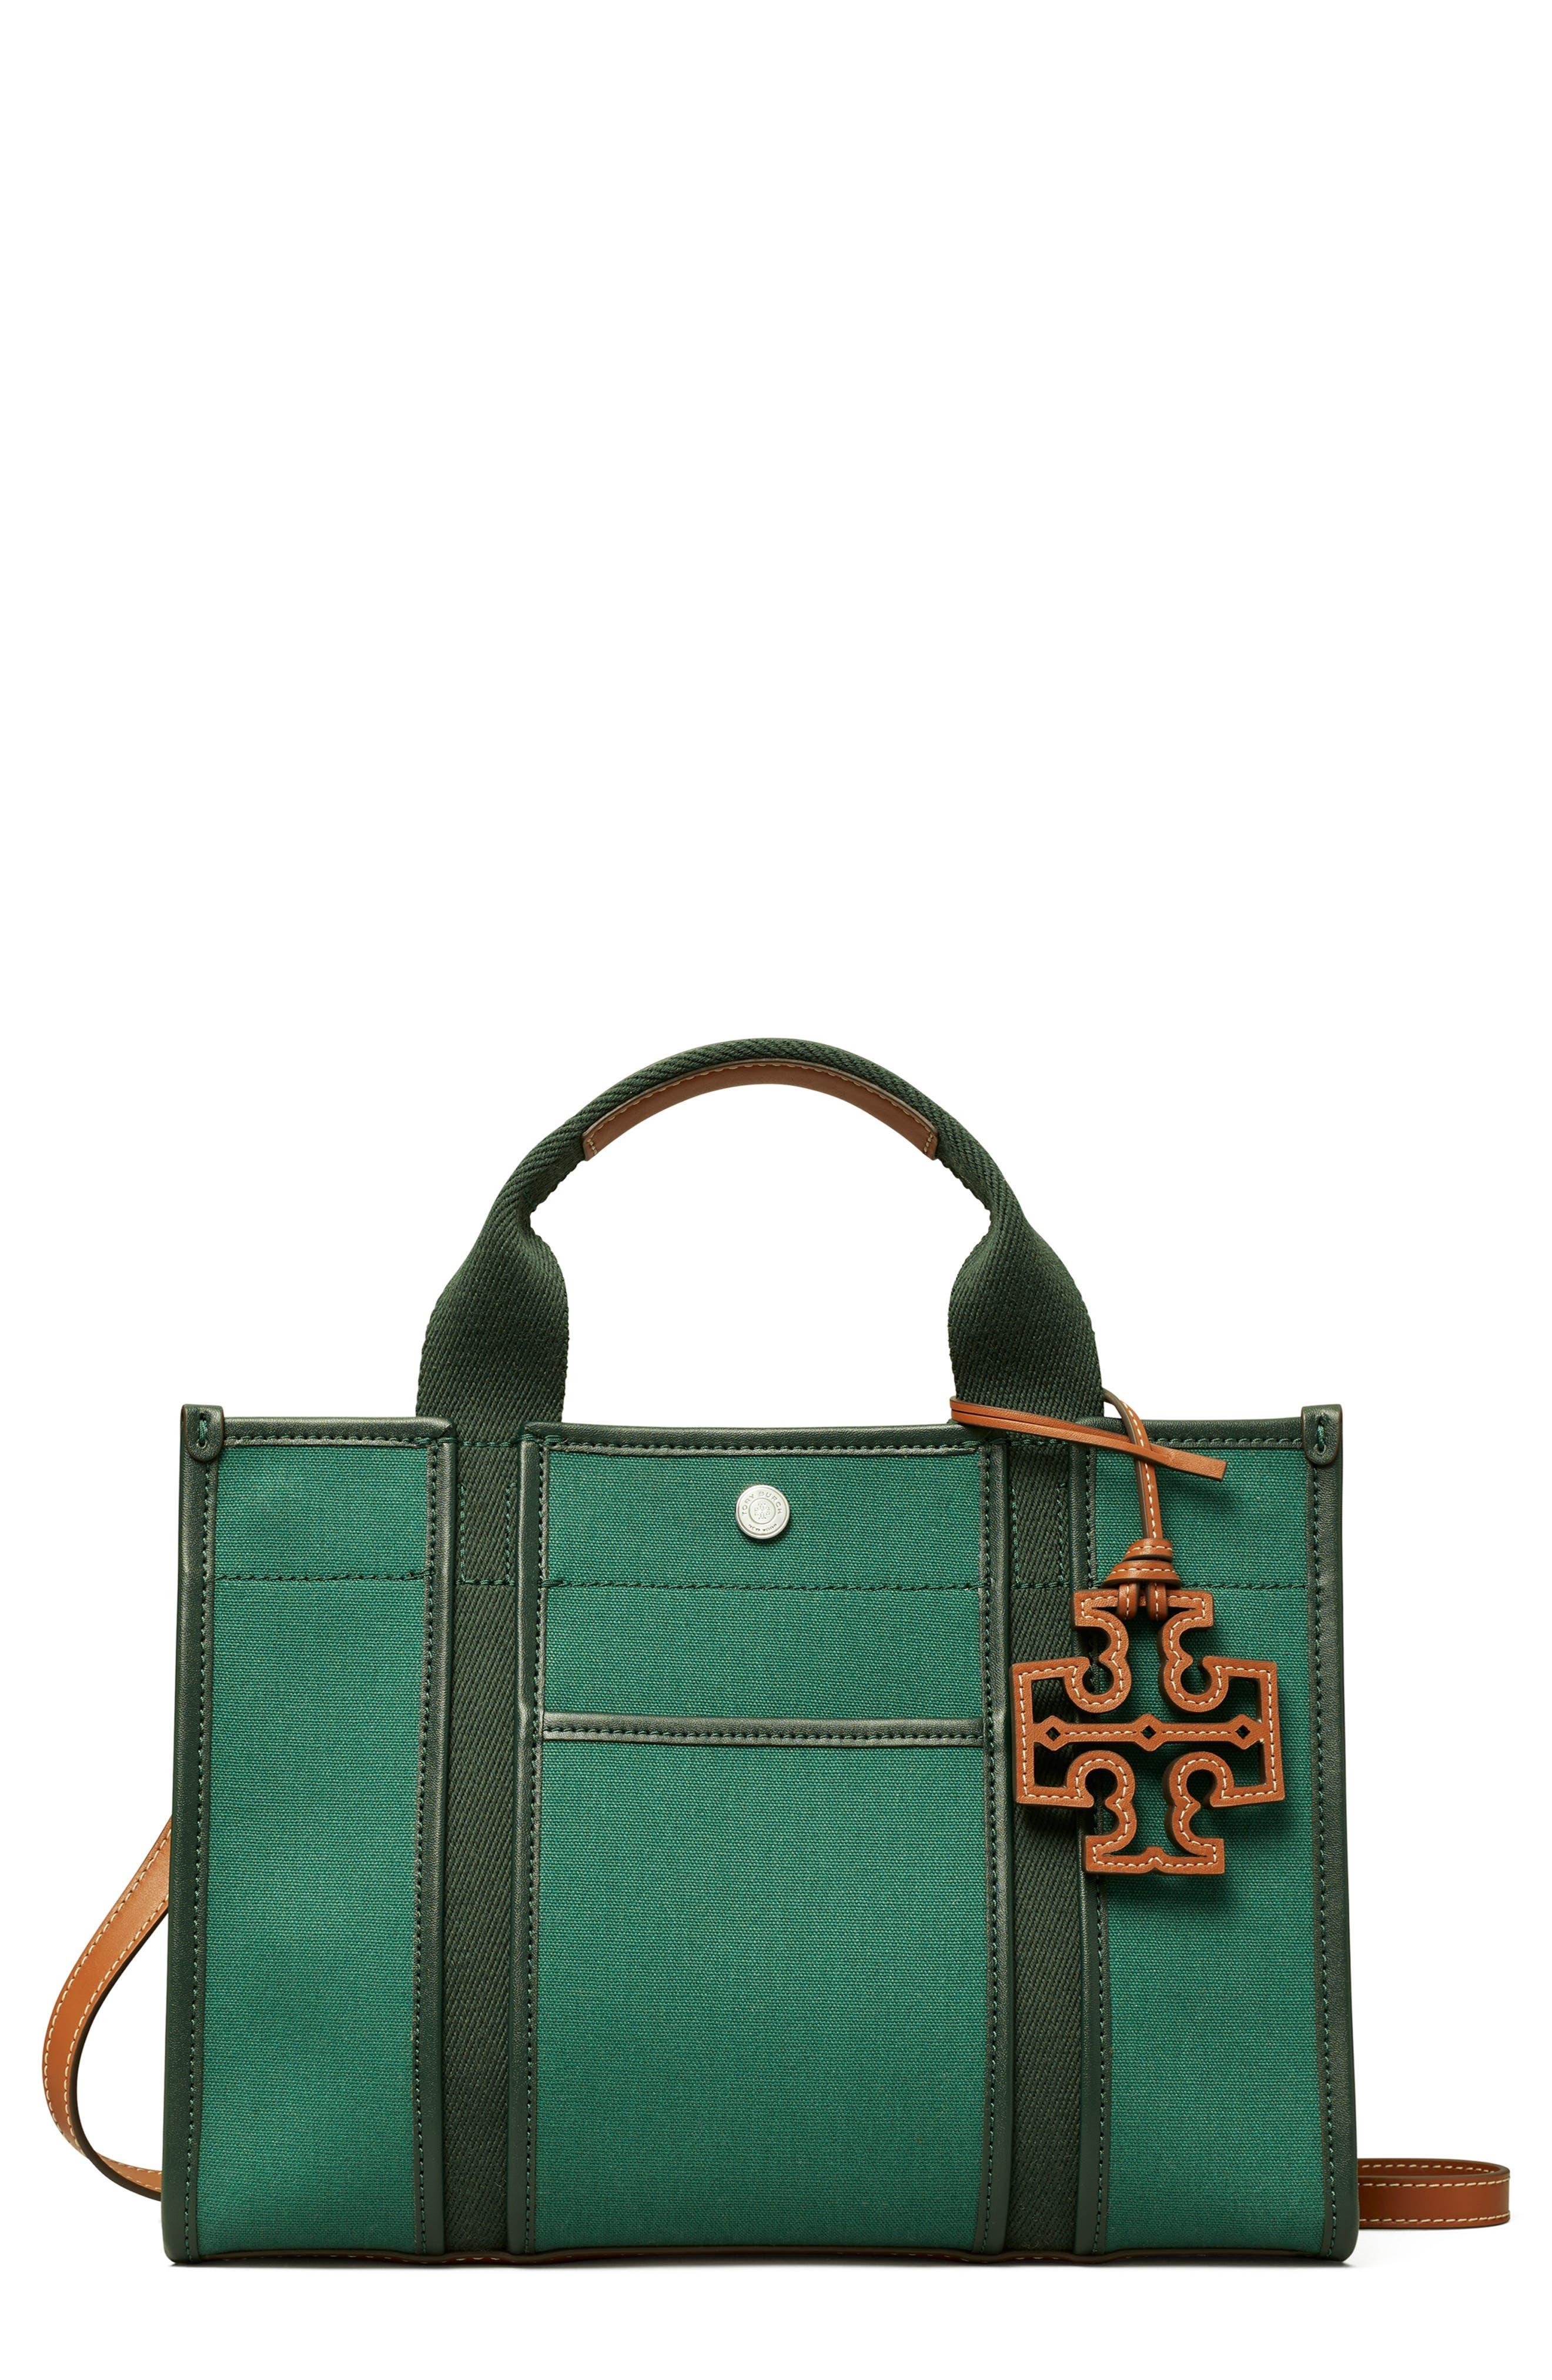 Tory Burch Twill Small Tory Tote